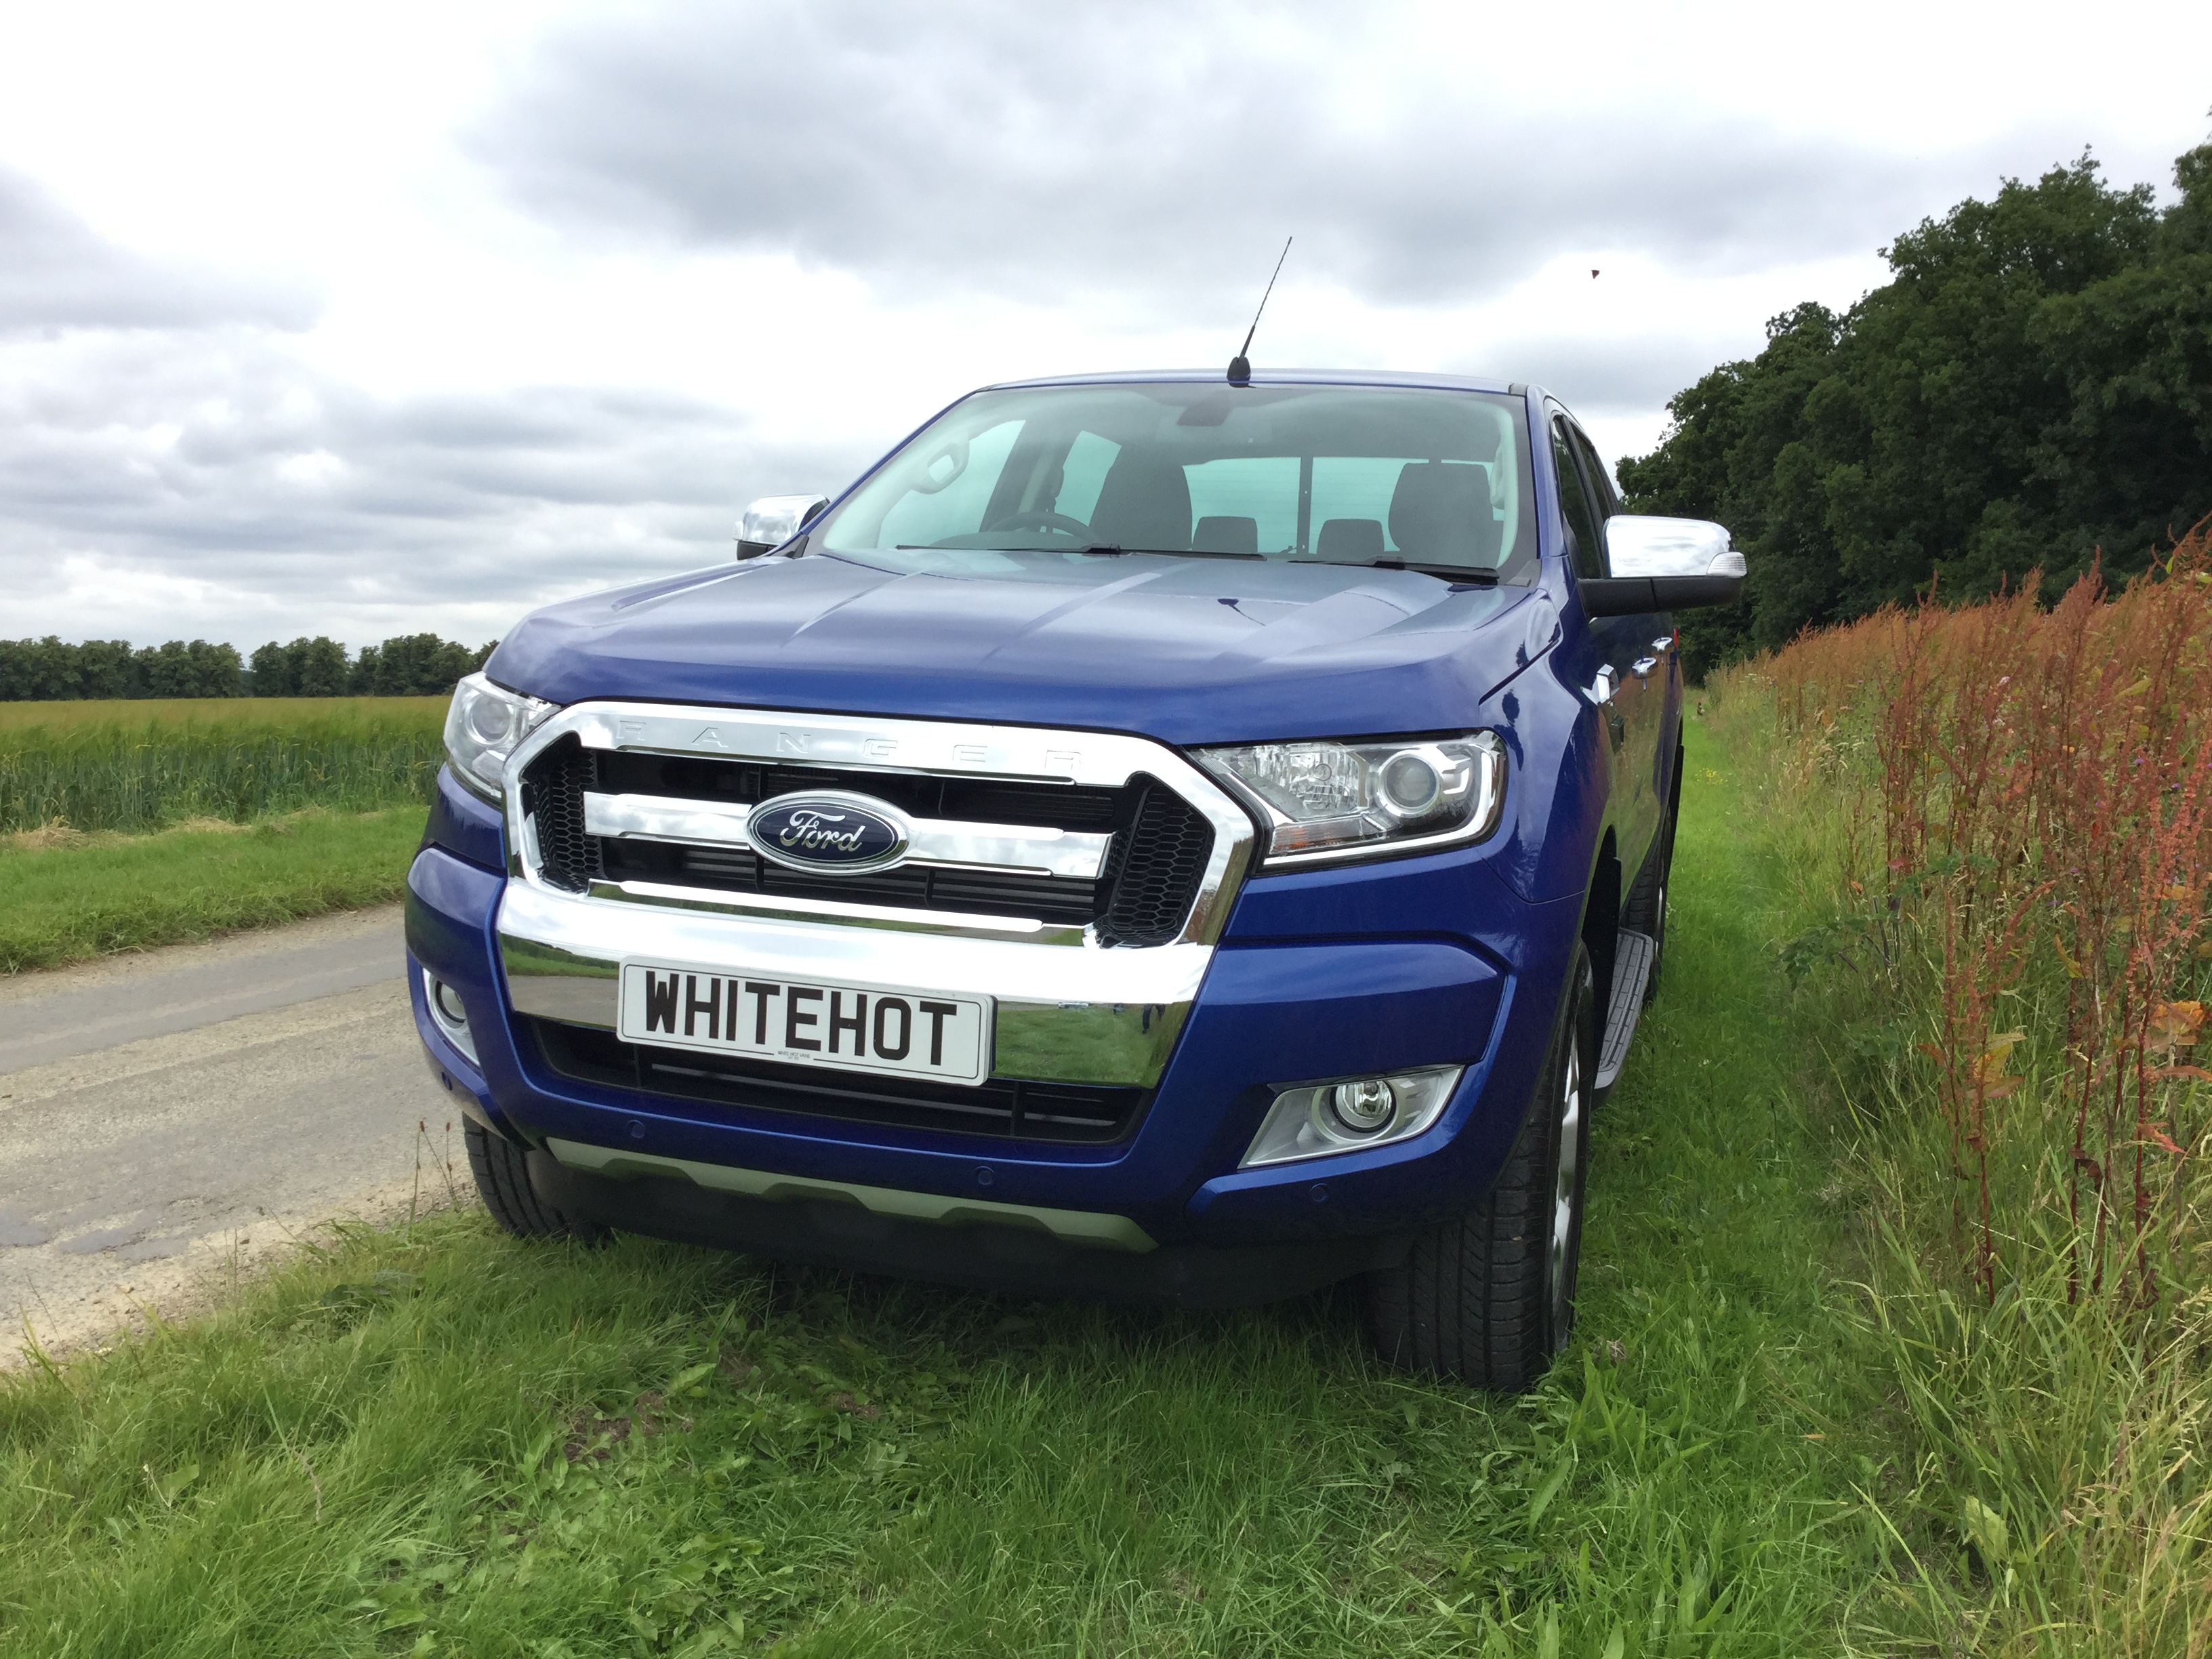 Ford Ranger Extra Cab accessories specifications